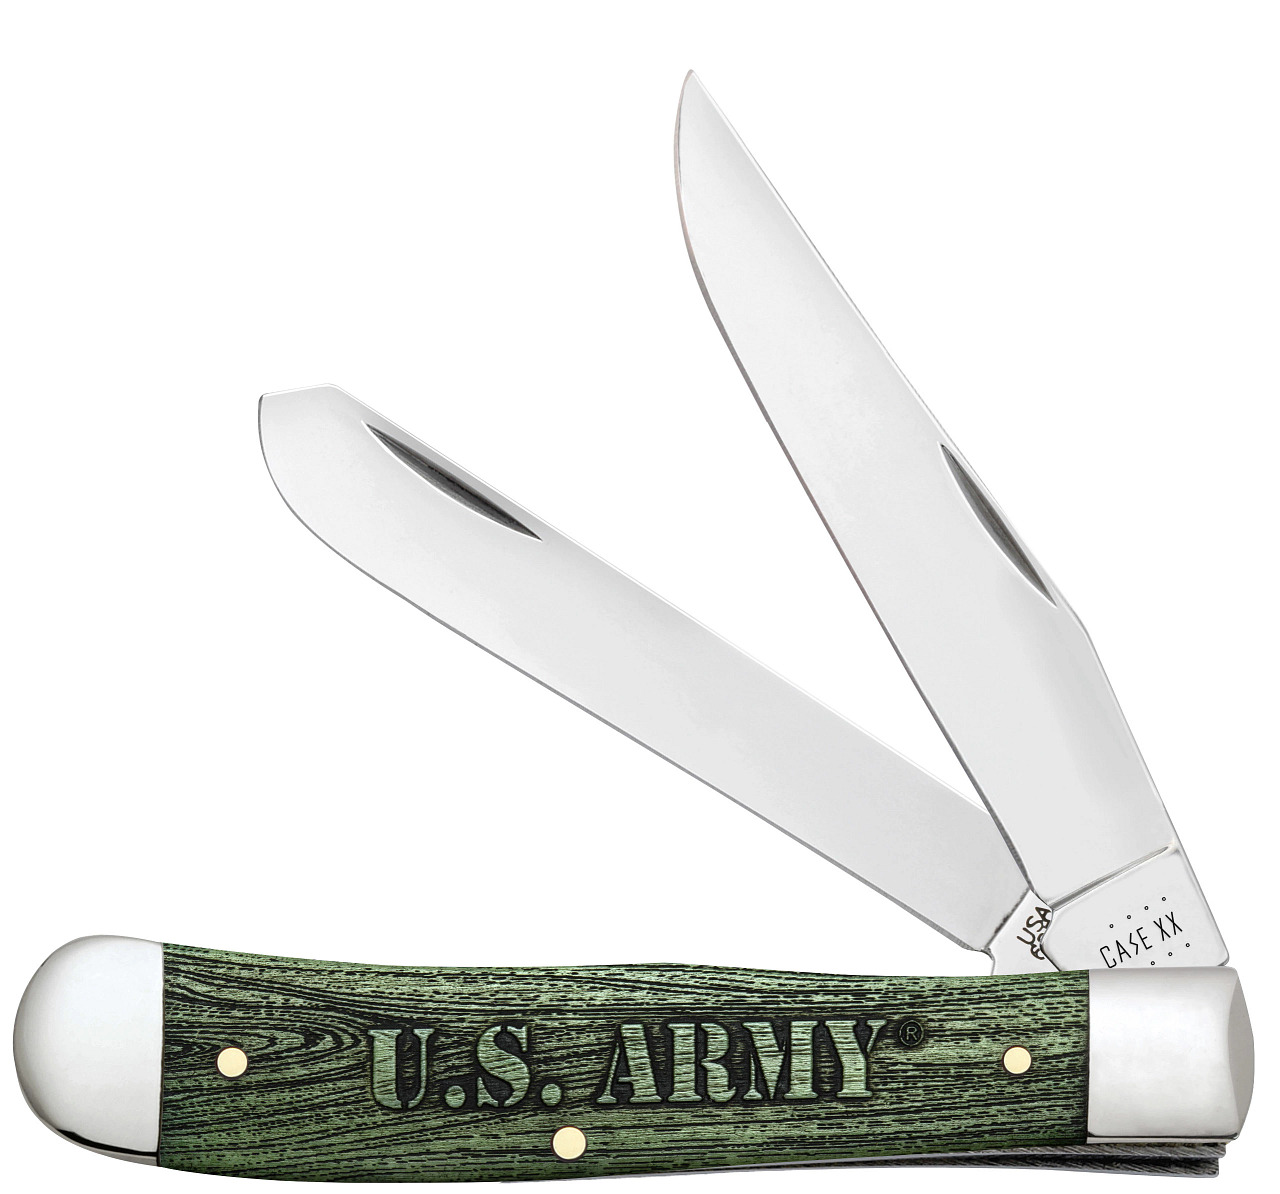 Case xx Knives Trapper U.S. ARMY Green-wash Bone 15035 Stainless Pocket Knife